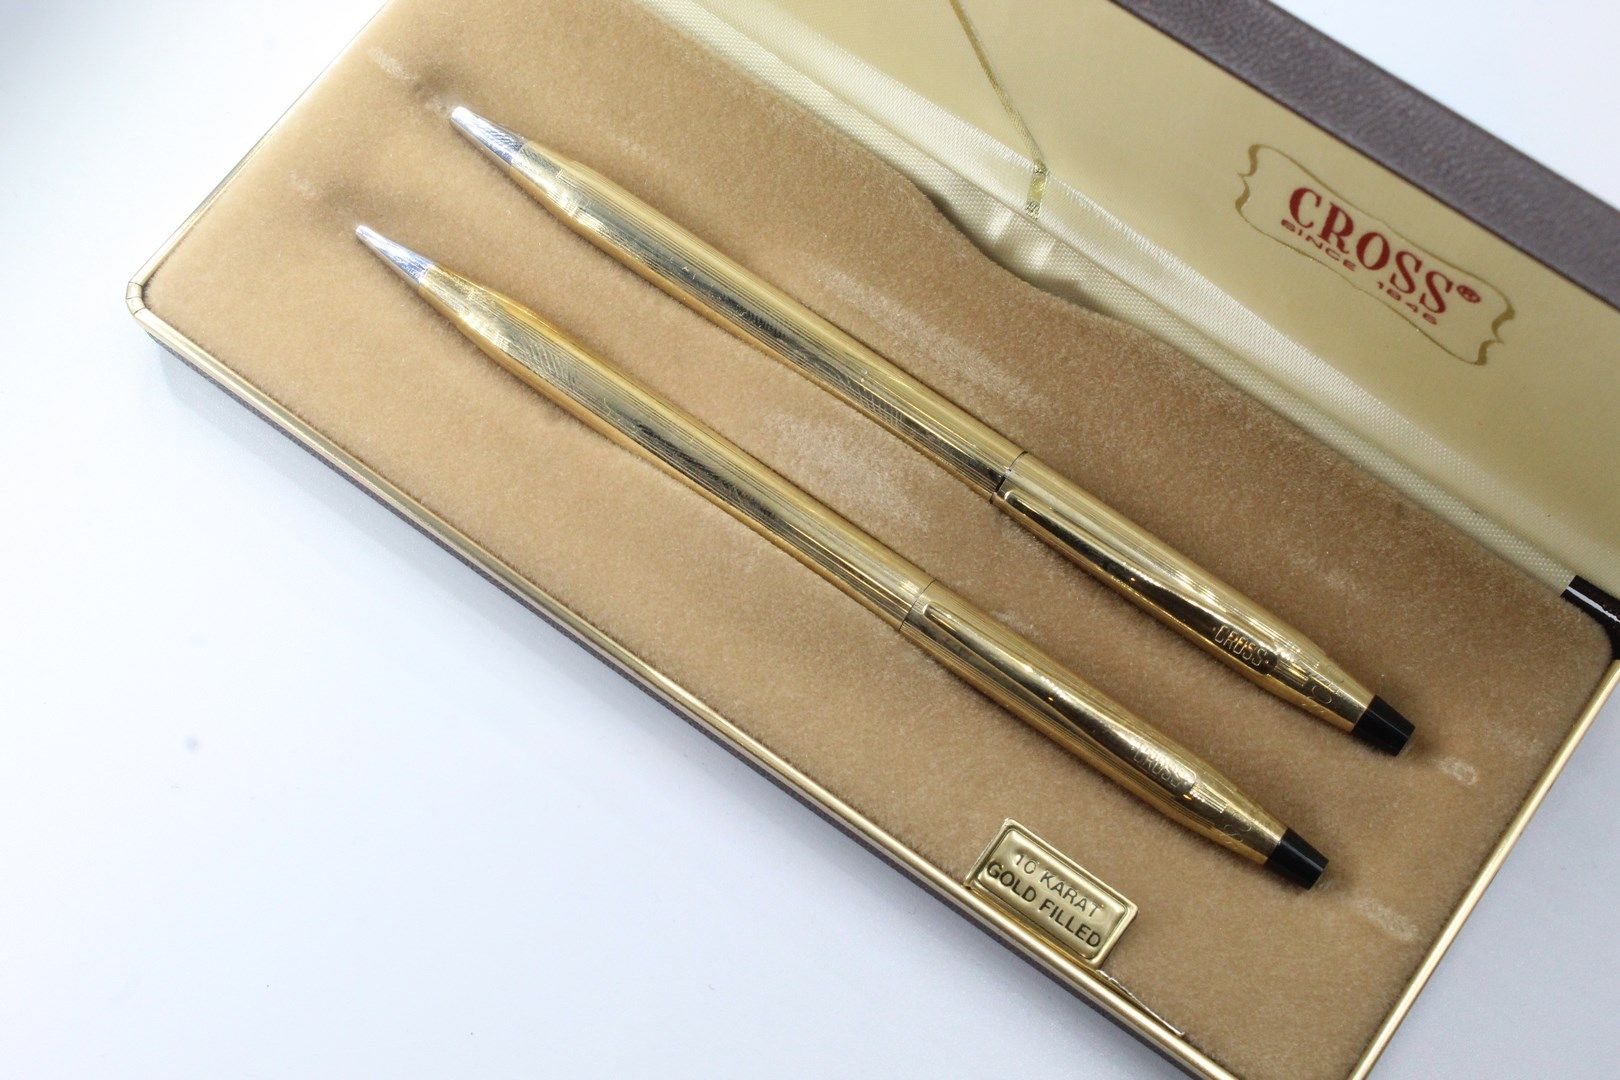 Null CROSS

Set of two gilded metal pens. 

In their original box